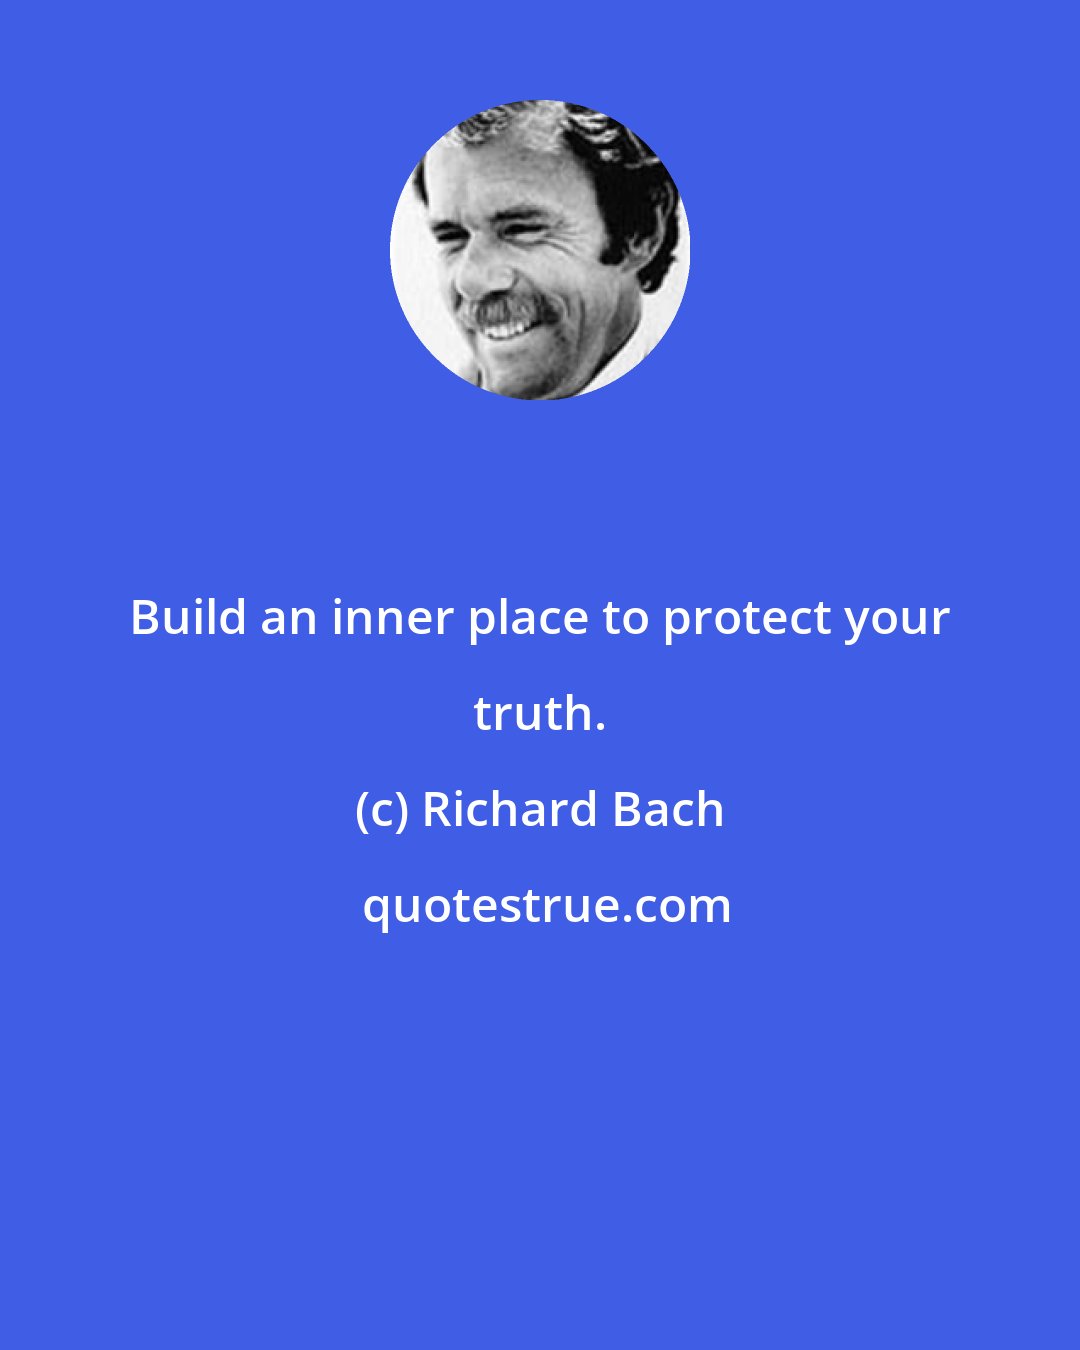 Richard Bach: Build an inner place to protect your truth.